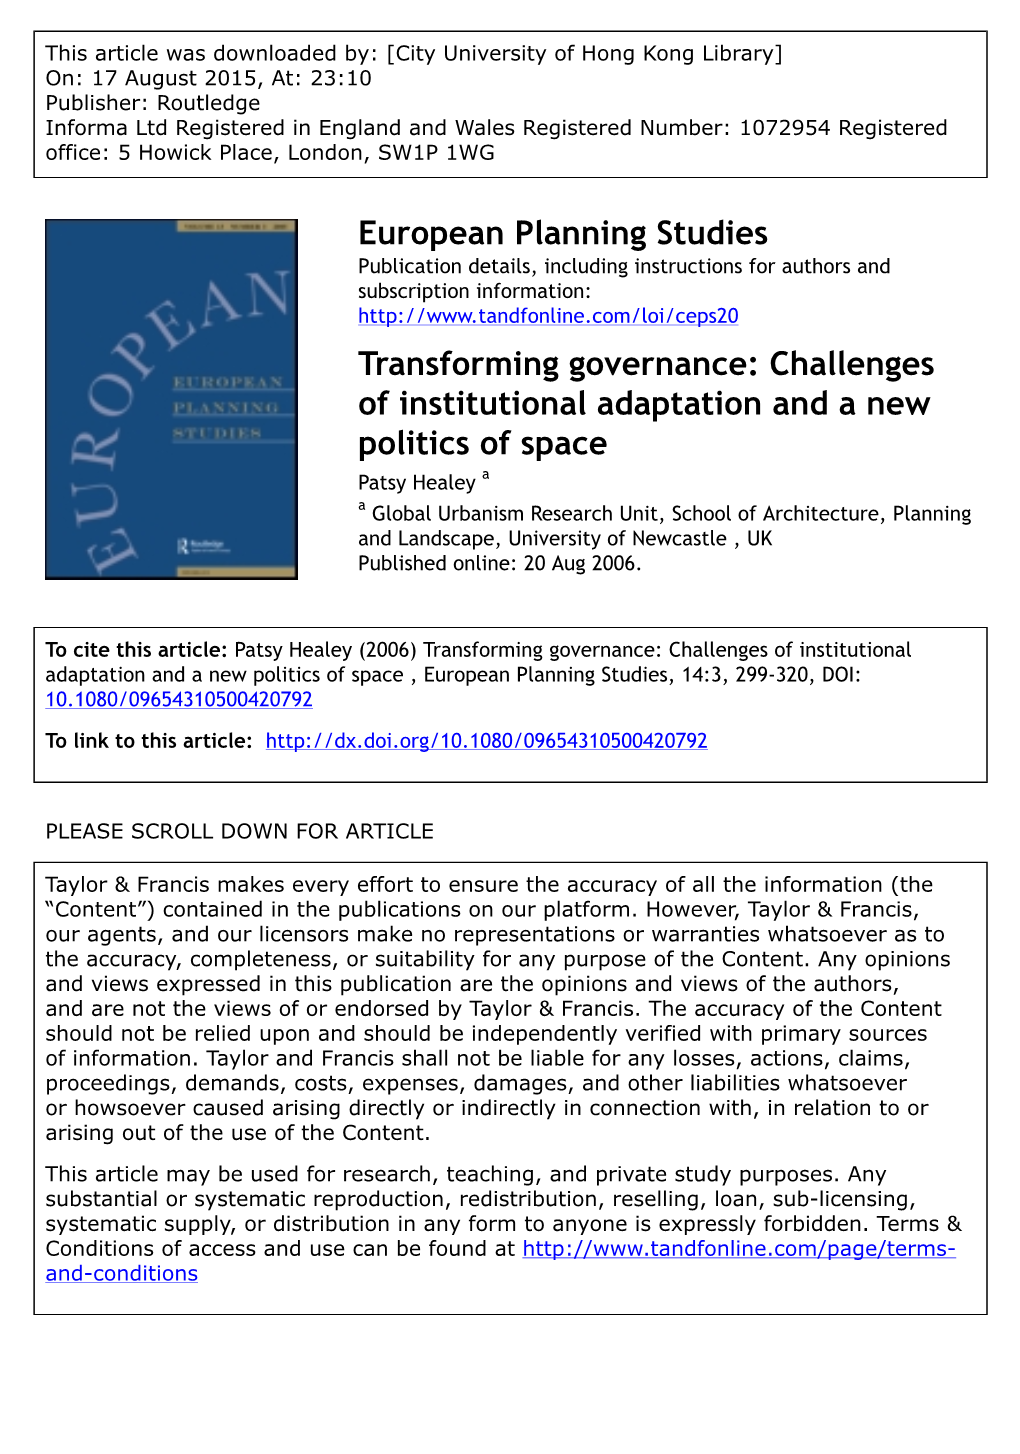 European Planning Studies Transforming Governance: Challenges of Institutional Adaptation and a New Politics of Space